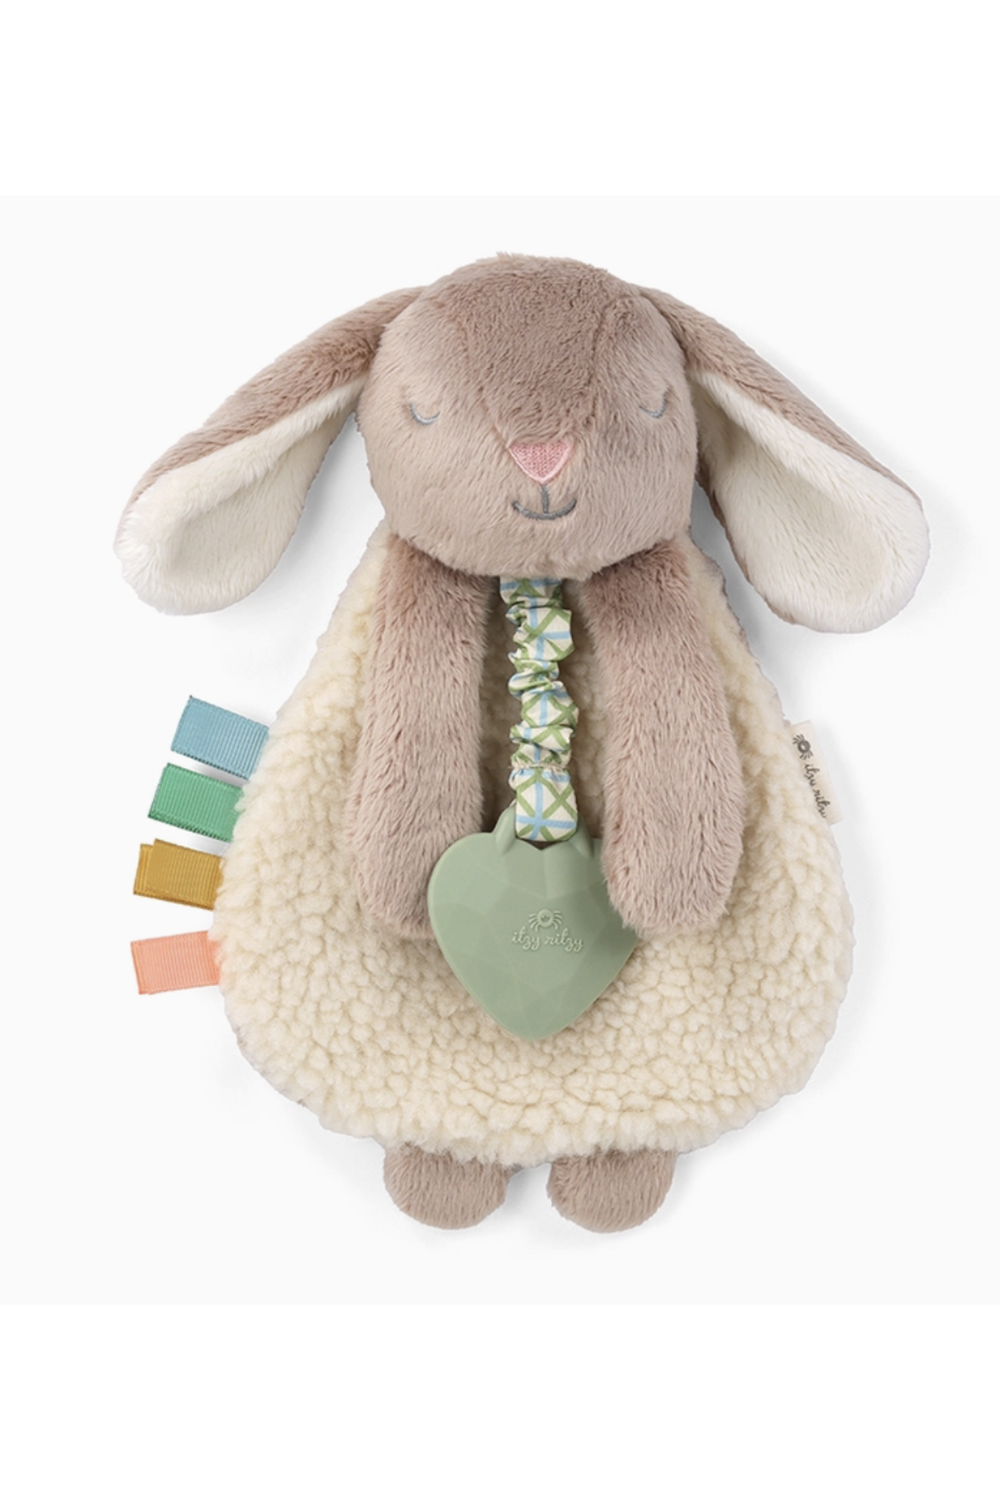 Lovey with Teether Toy - Taupe Bunny